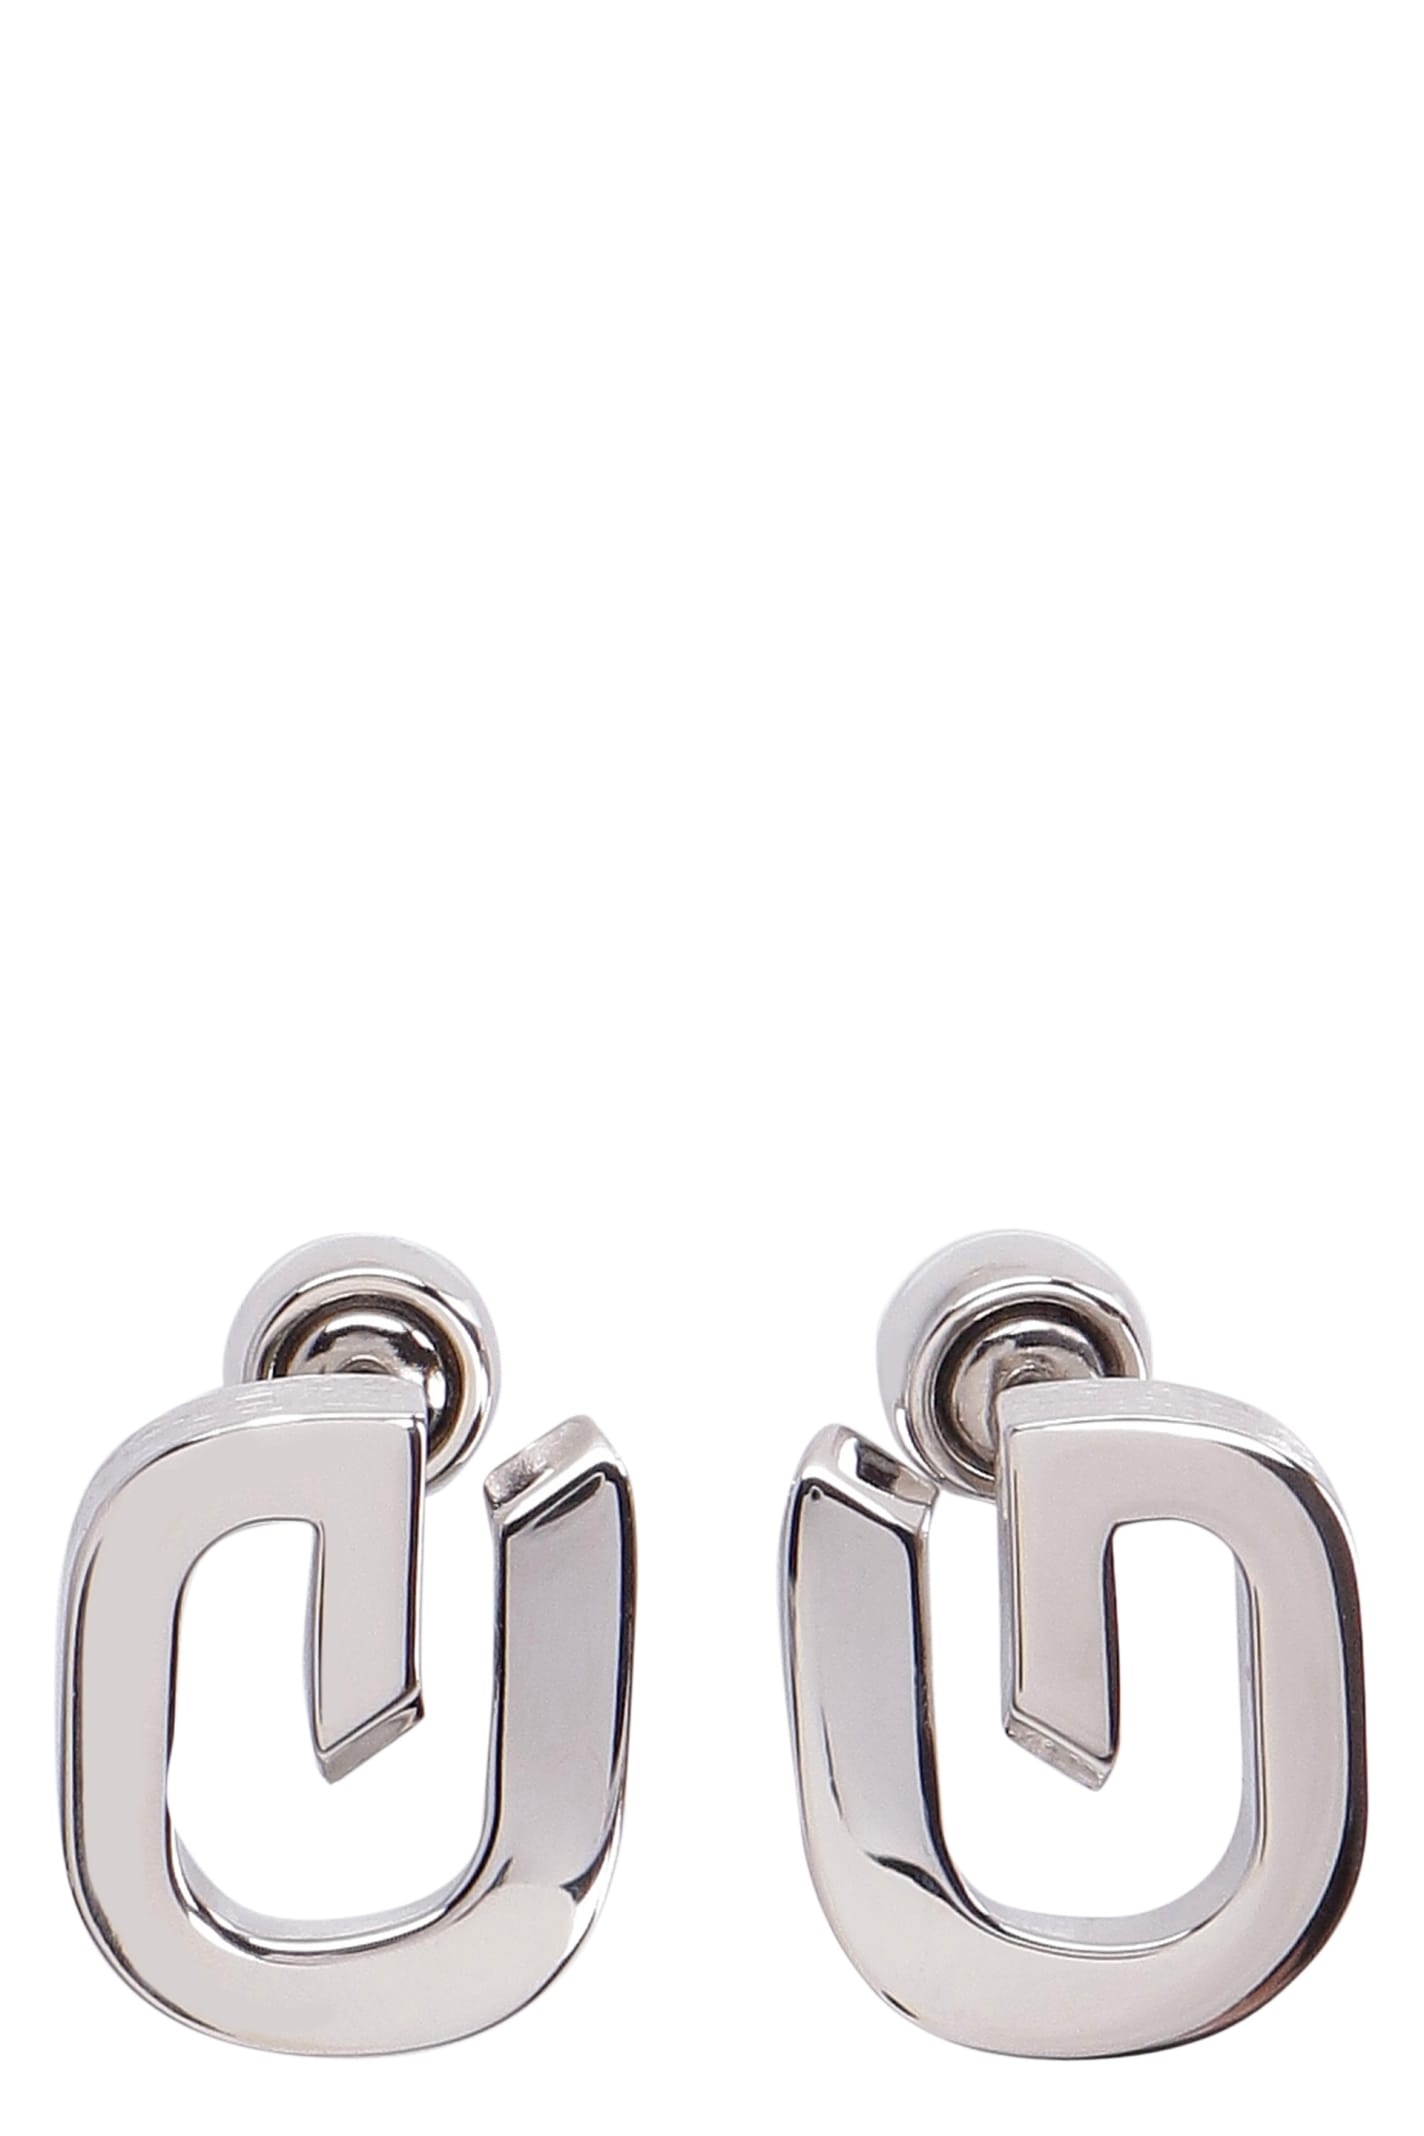 Givenchy G Link Logoed Earrings